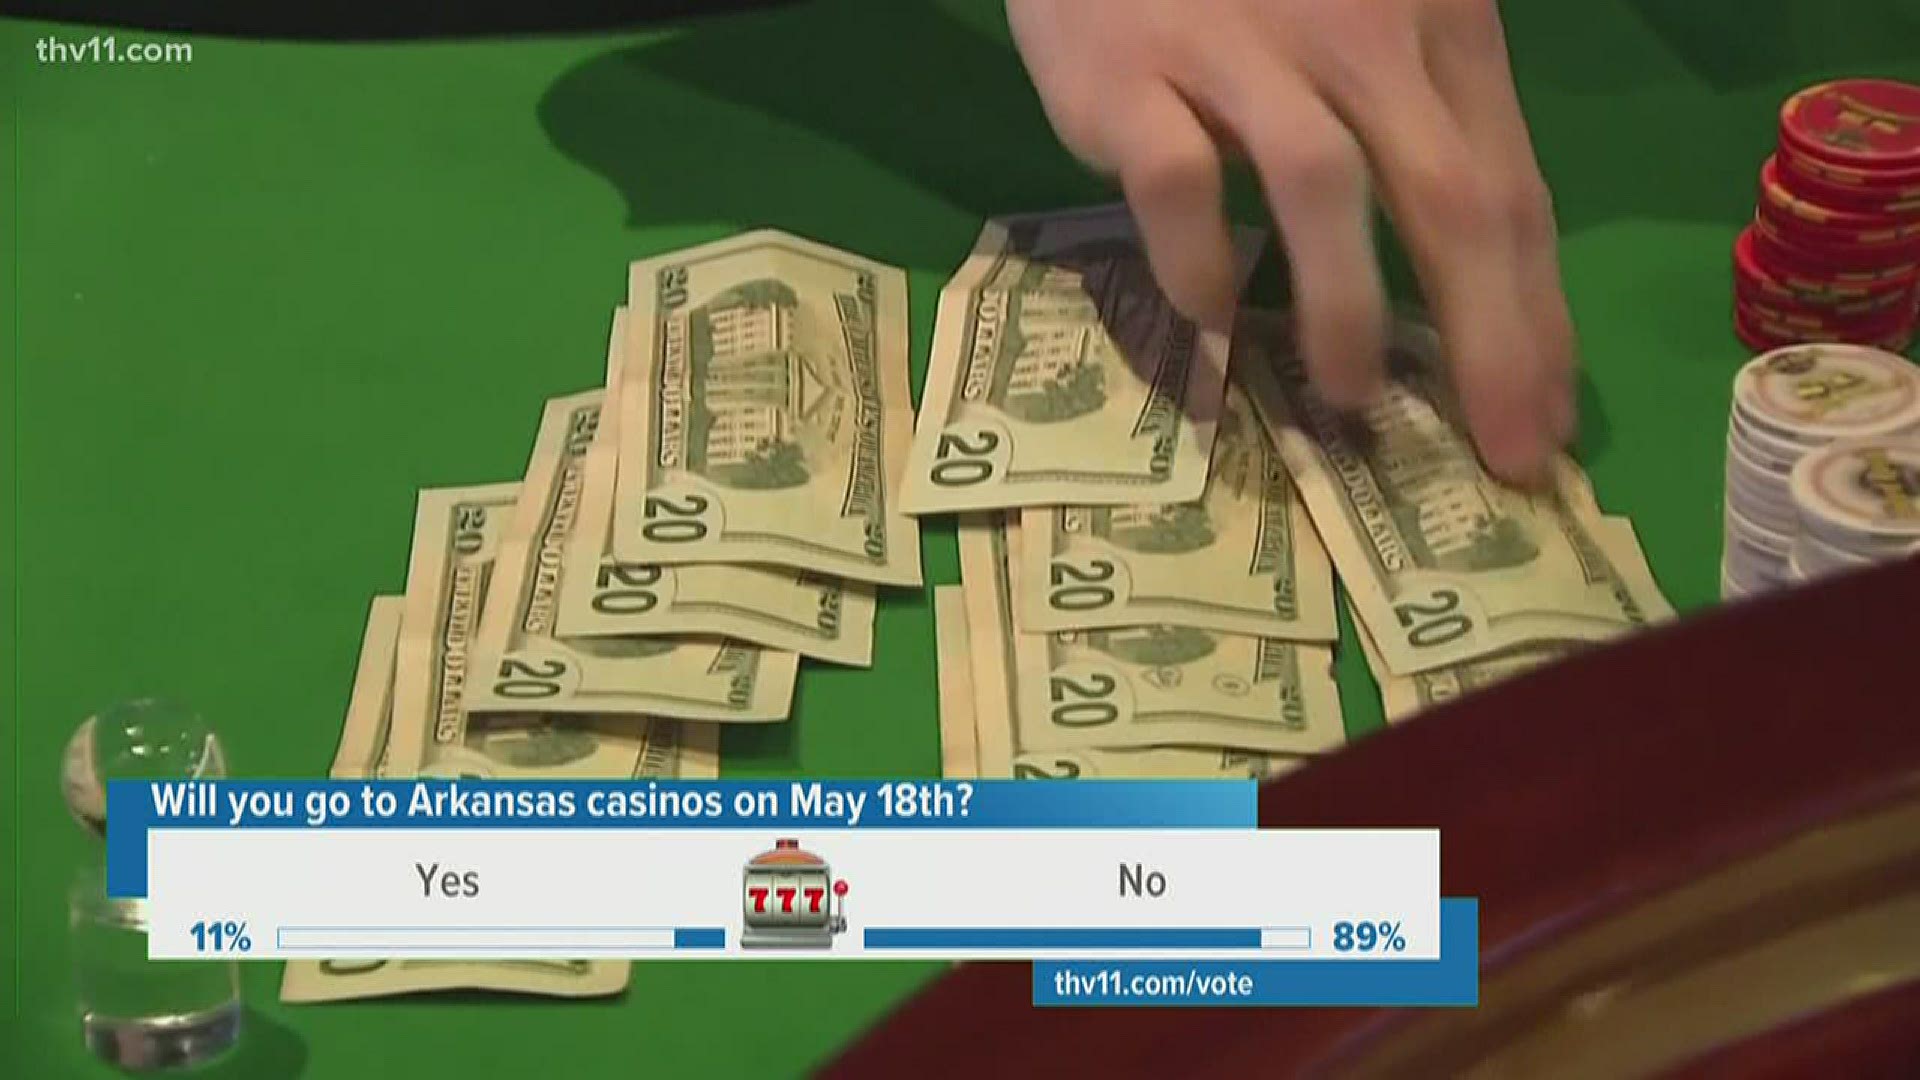 In another push to open the state's economy, casinos are given the green light to possibly open on May 18.